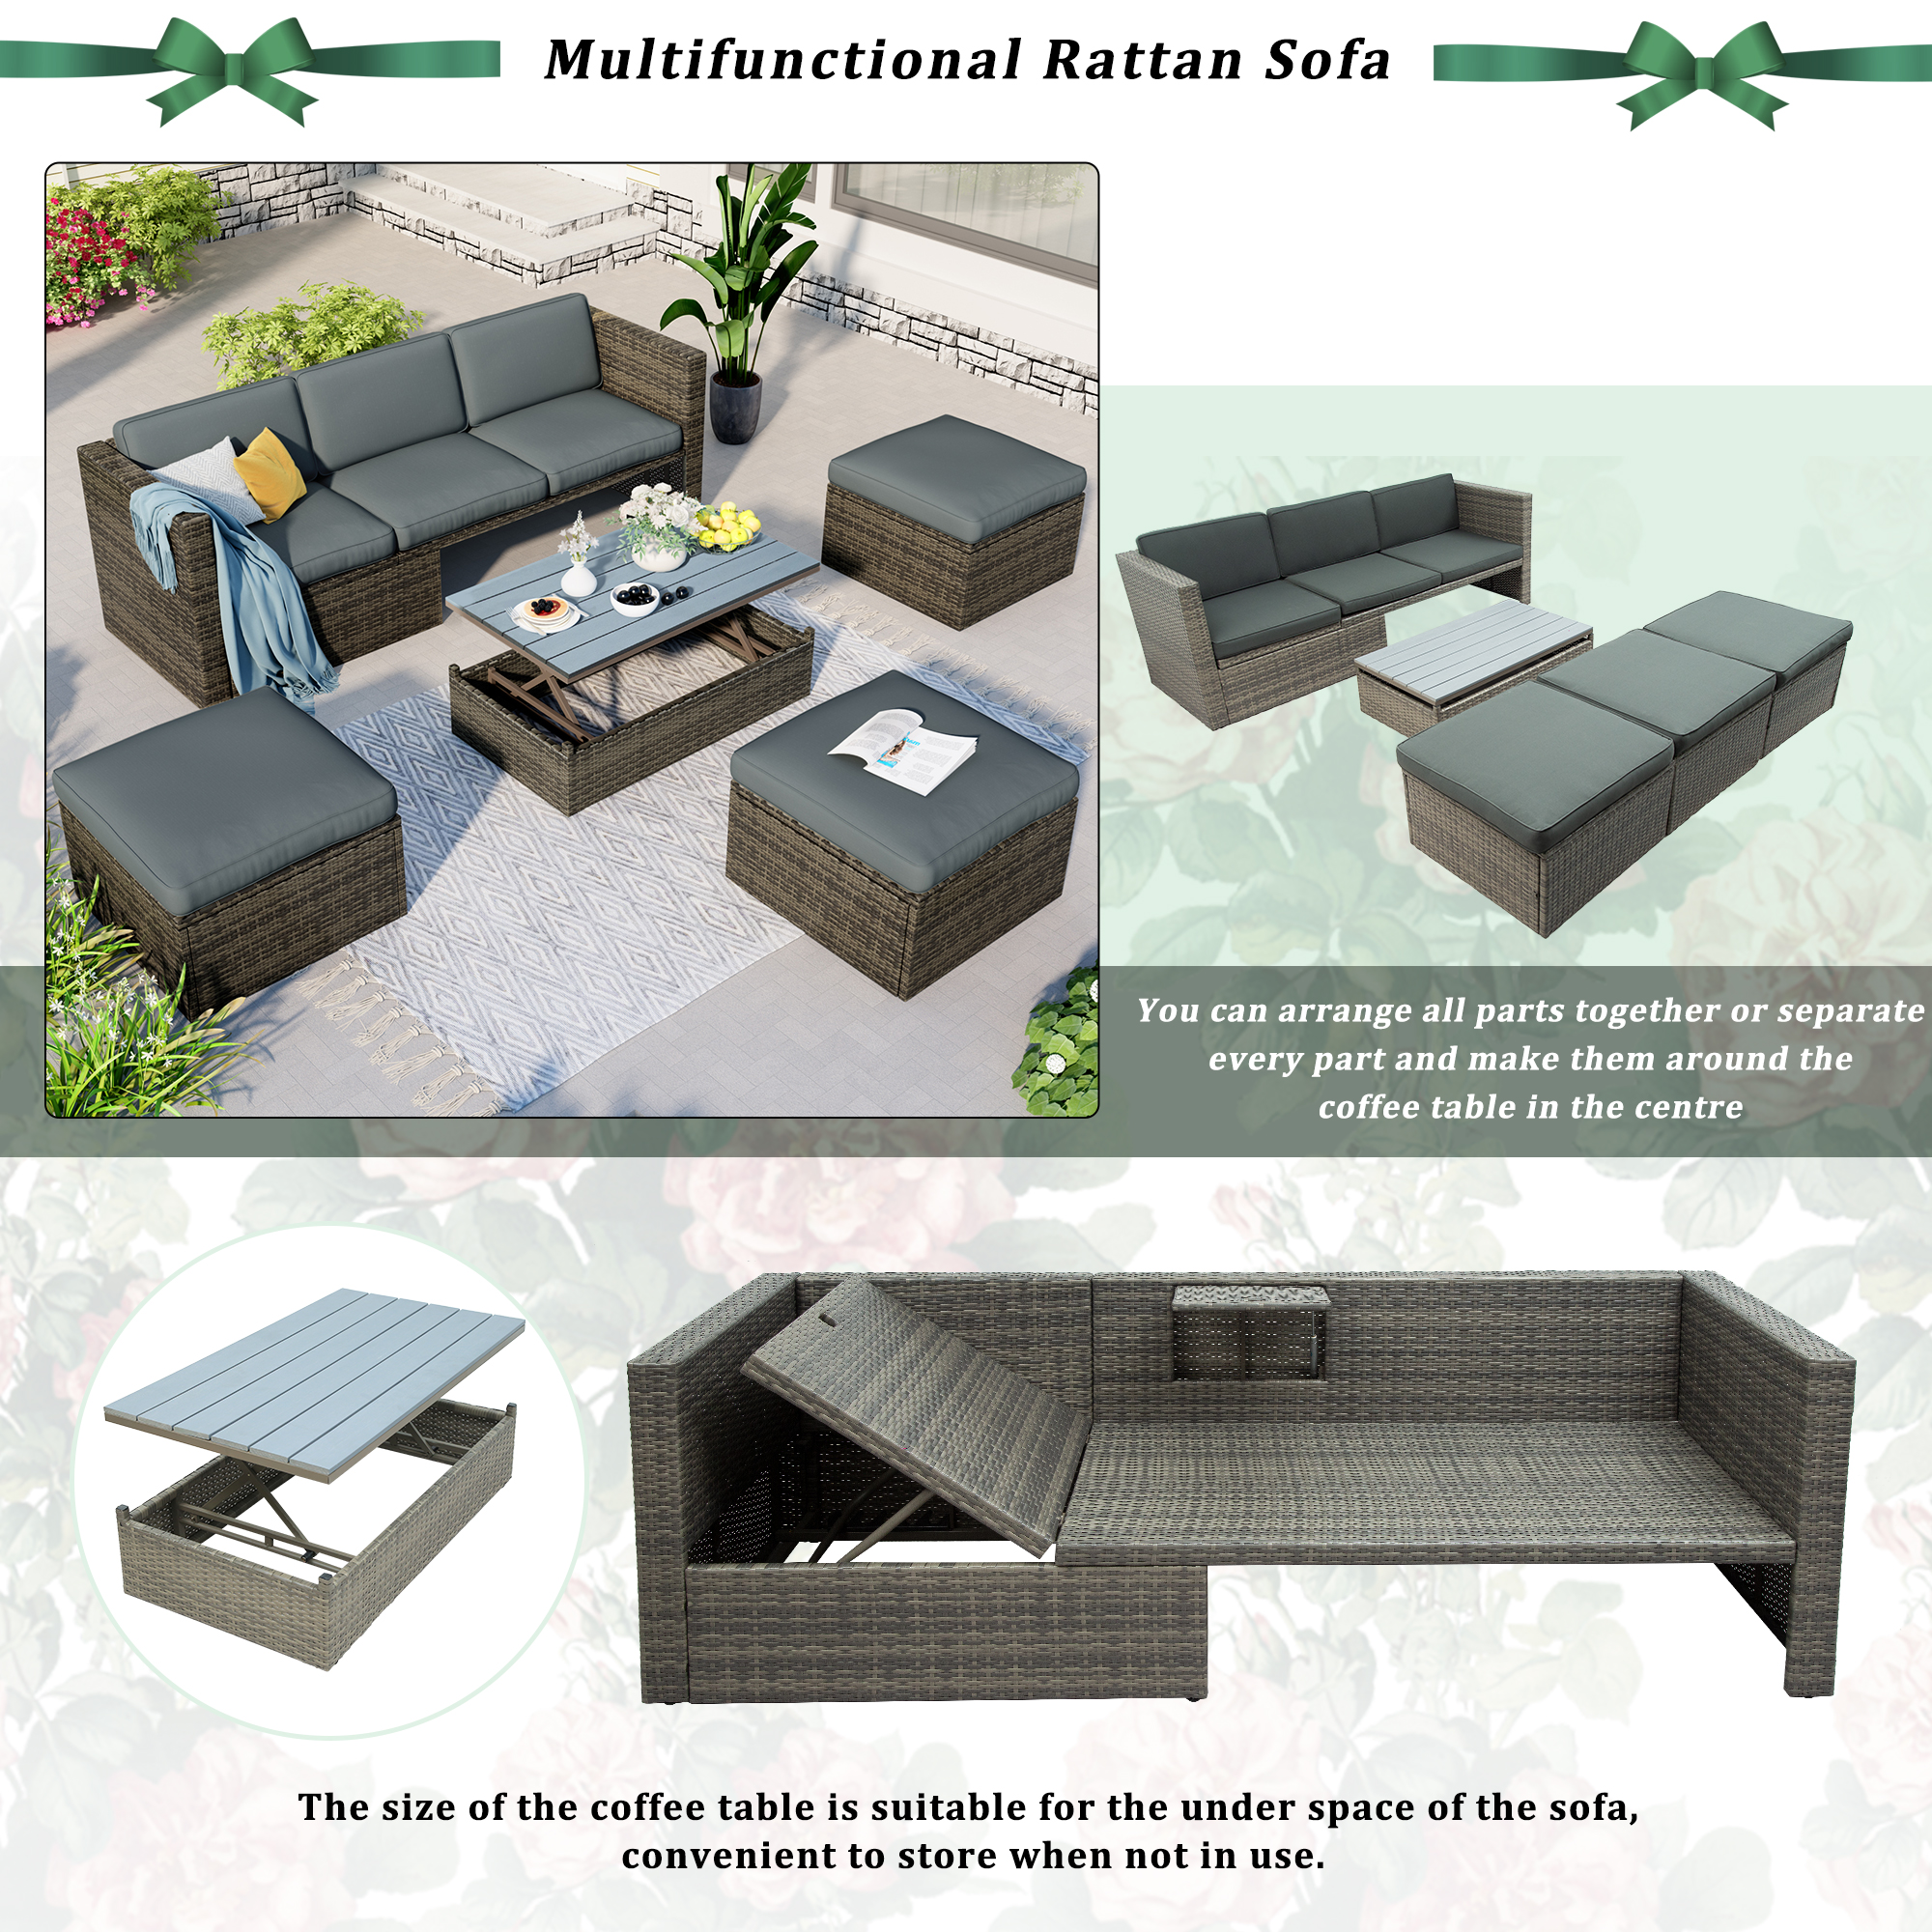 5-Piece Patio Wicker Sofa with Adustable Backrest, Cushions, Ottomans and Lift Top Coffee Table